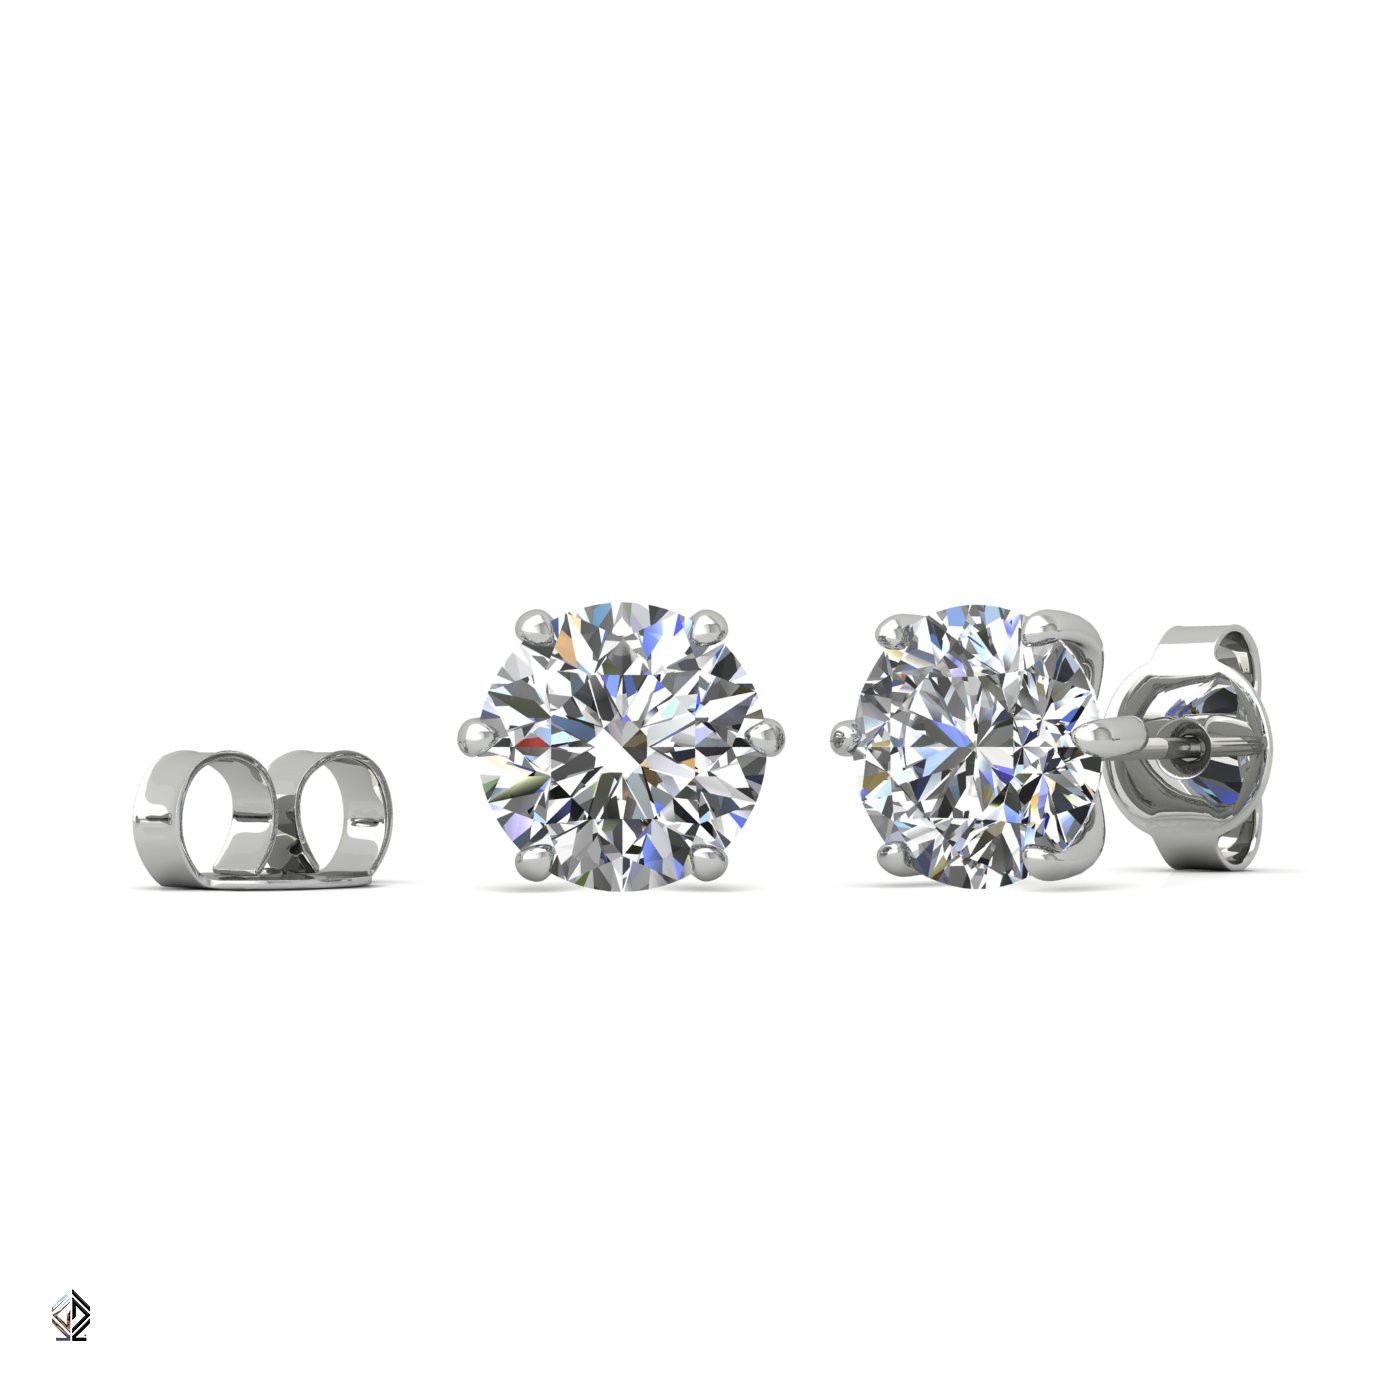 18k white gold 0,3 ct each (0,6 tcw) 6 prongs round shape diamond earrings Photos & images